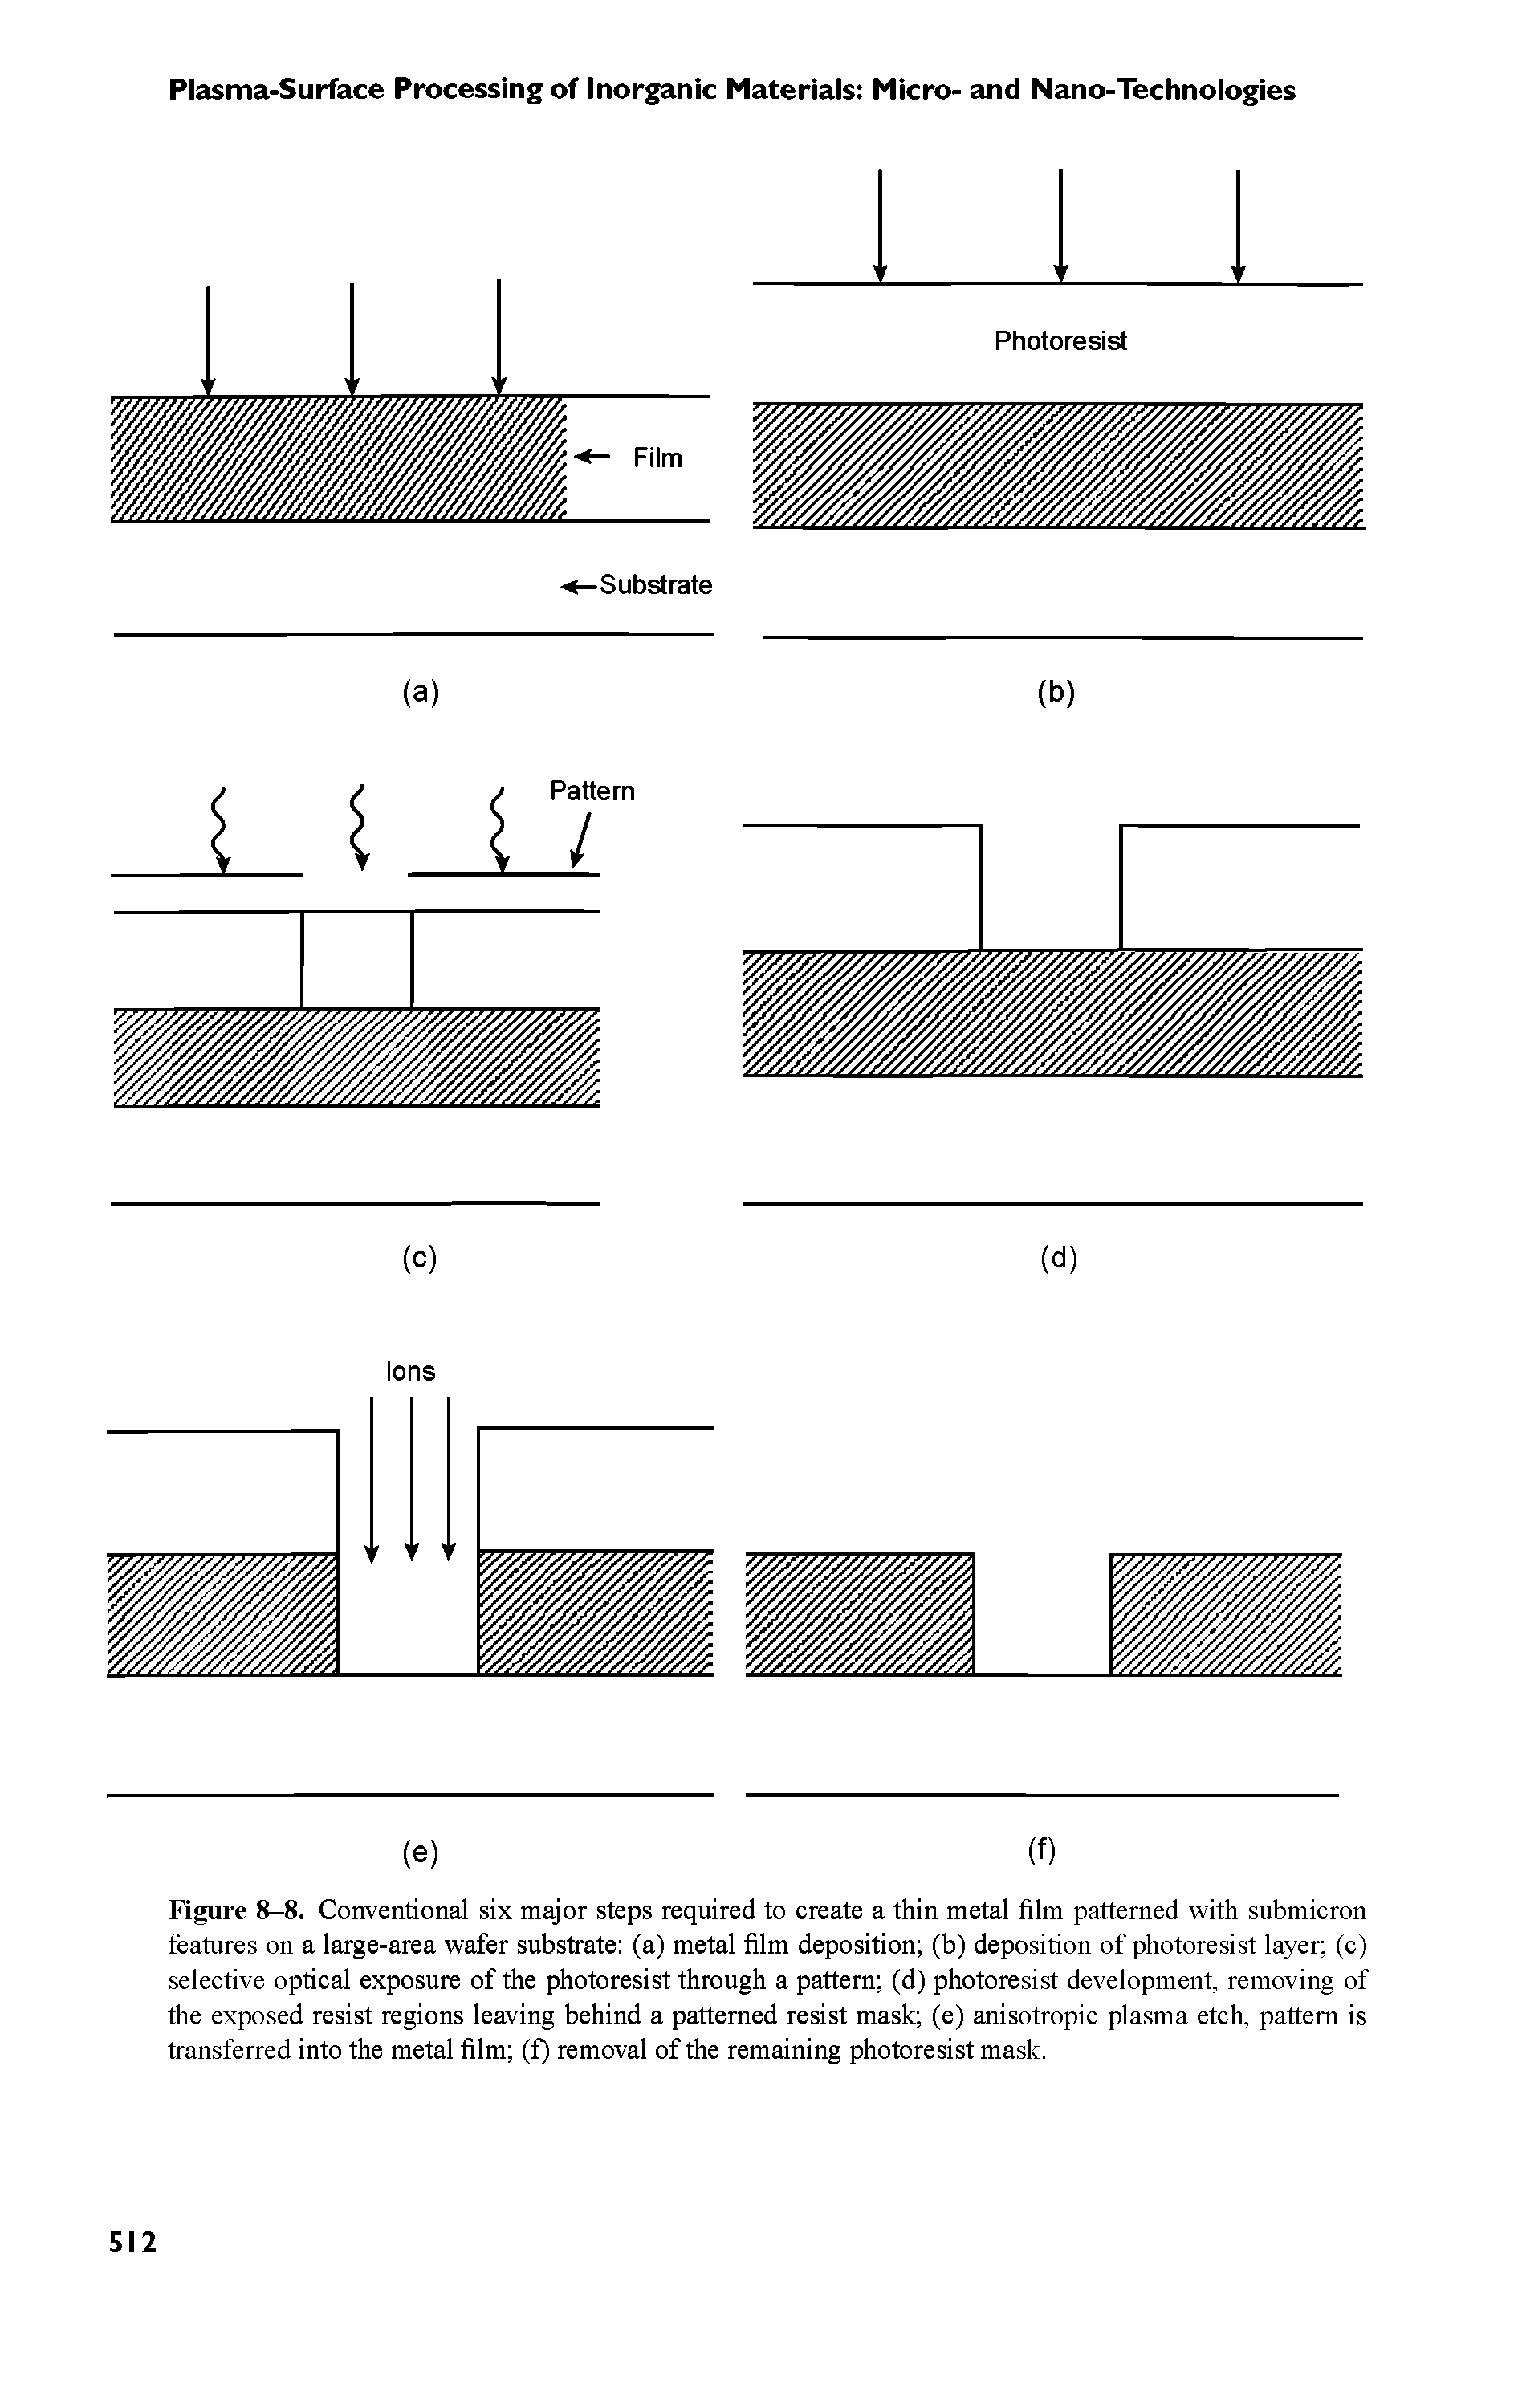 Figure 8-8. Conventional six major steps required to ereate a thin metal film patterned with submicron features on a large-area wafer substrate (a) metal film deposition (b) deposition of photoresist layer (c) selective optieal exposure of the photoresist through a pattern (d) photoresist development, removing of the exposed resist regions leaving behind a patterned resist mask (e) anisotropic plasma etch, pattern is transferred into the metal film (f) removal of the remaining photoresist mask.